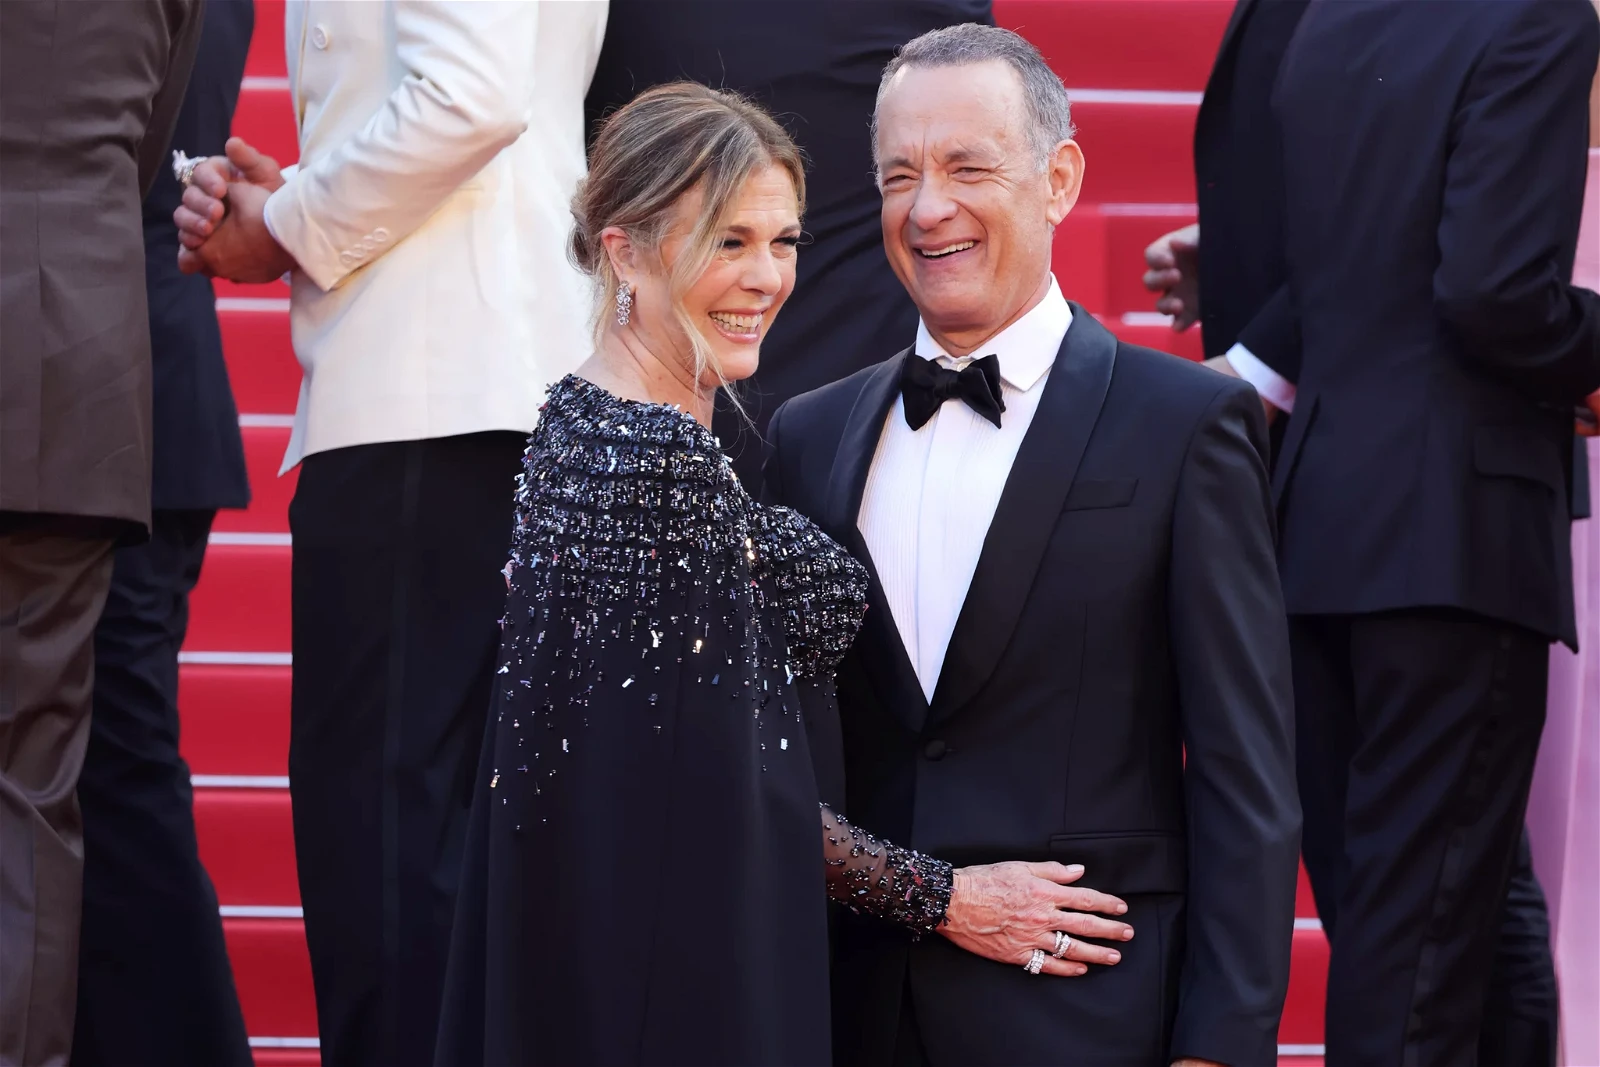 Tom Hanks and Rita Wilson at the Cannes Film Festival